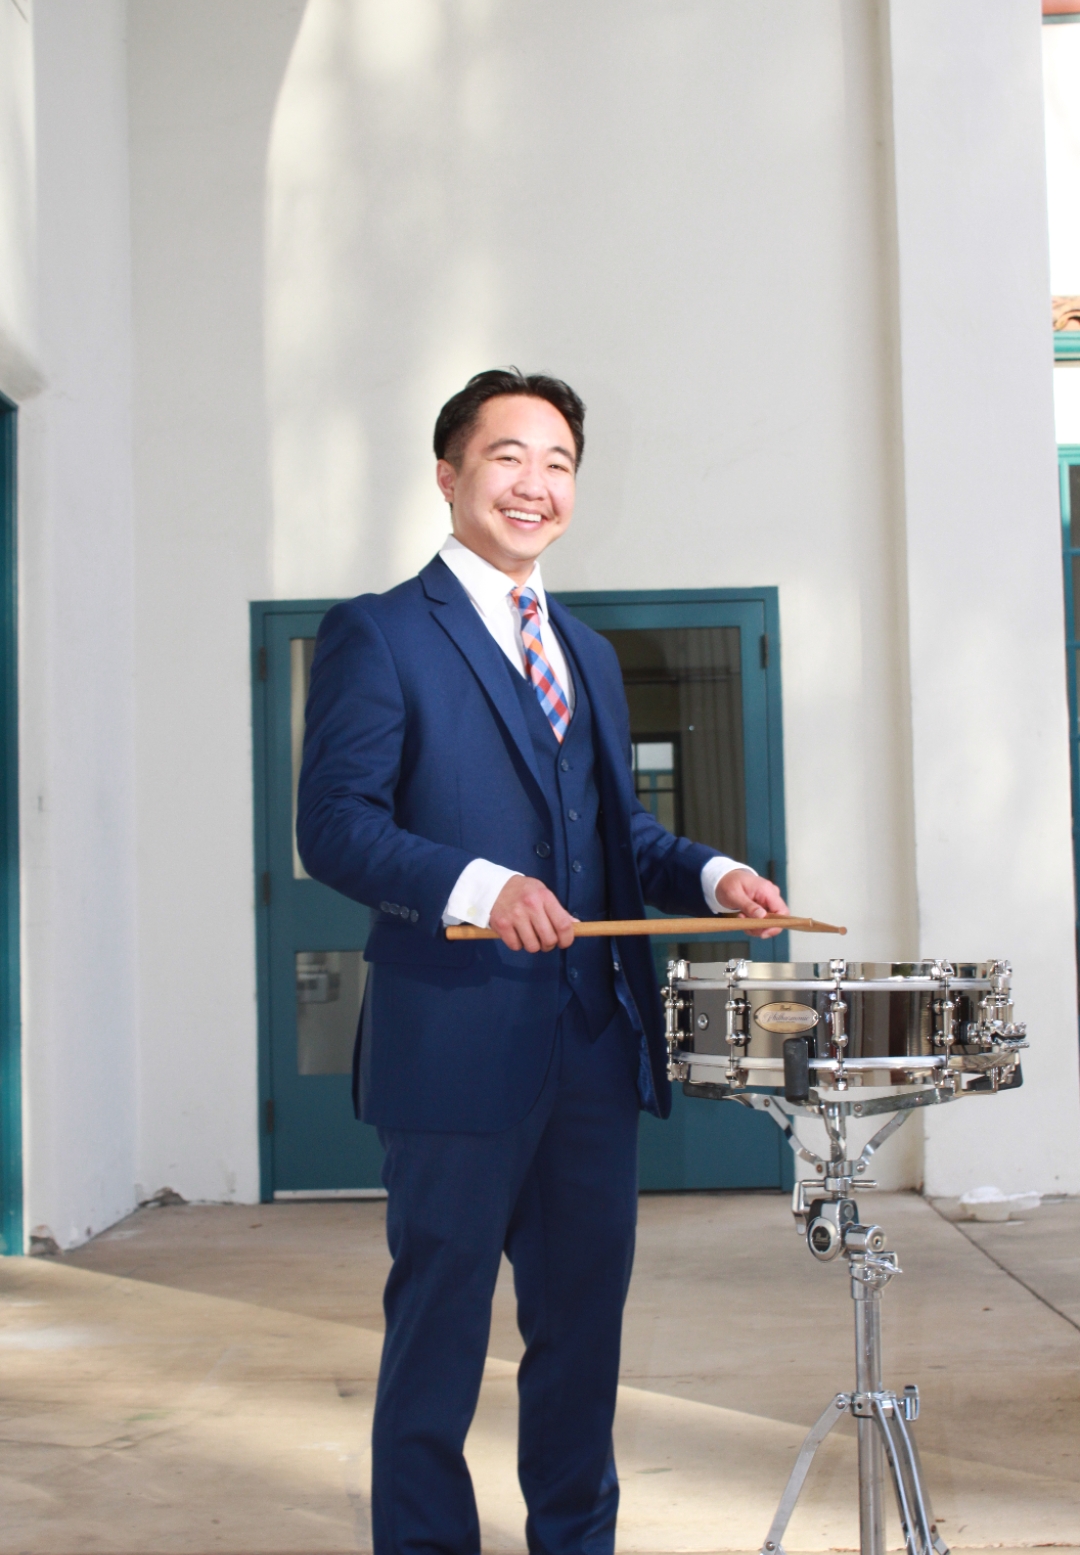 Allen Daniel Rivera playing drums in a suit outdoors